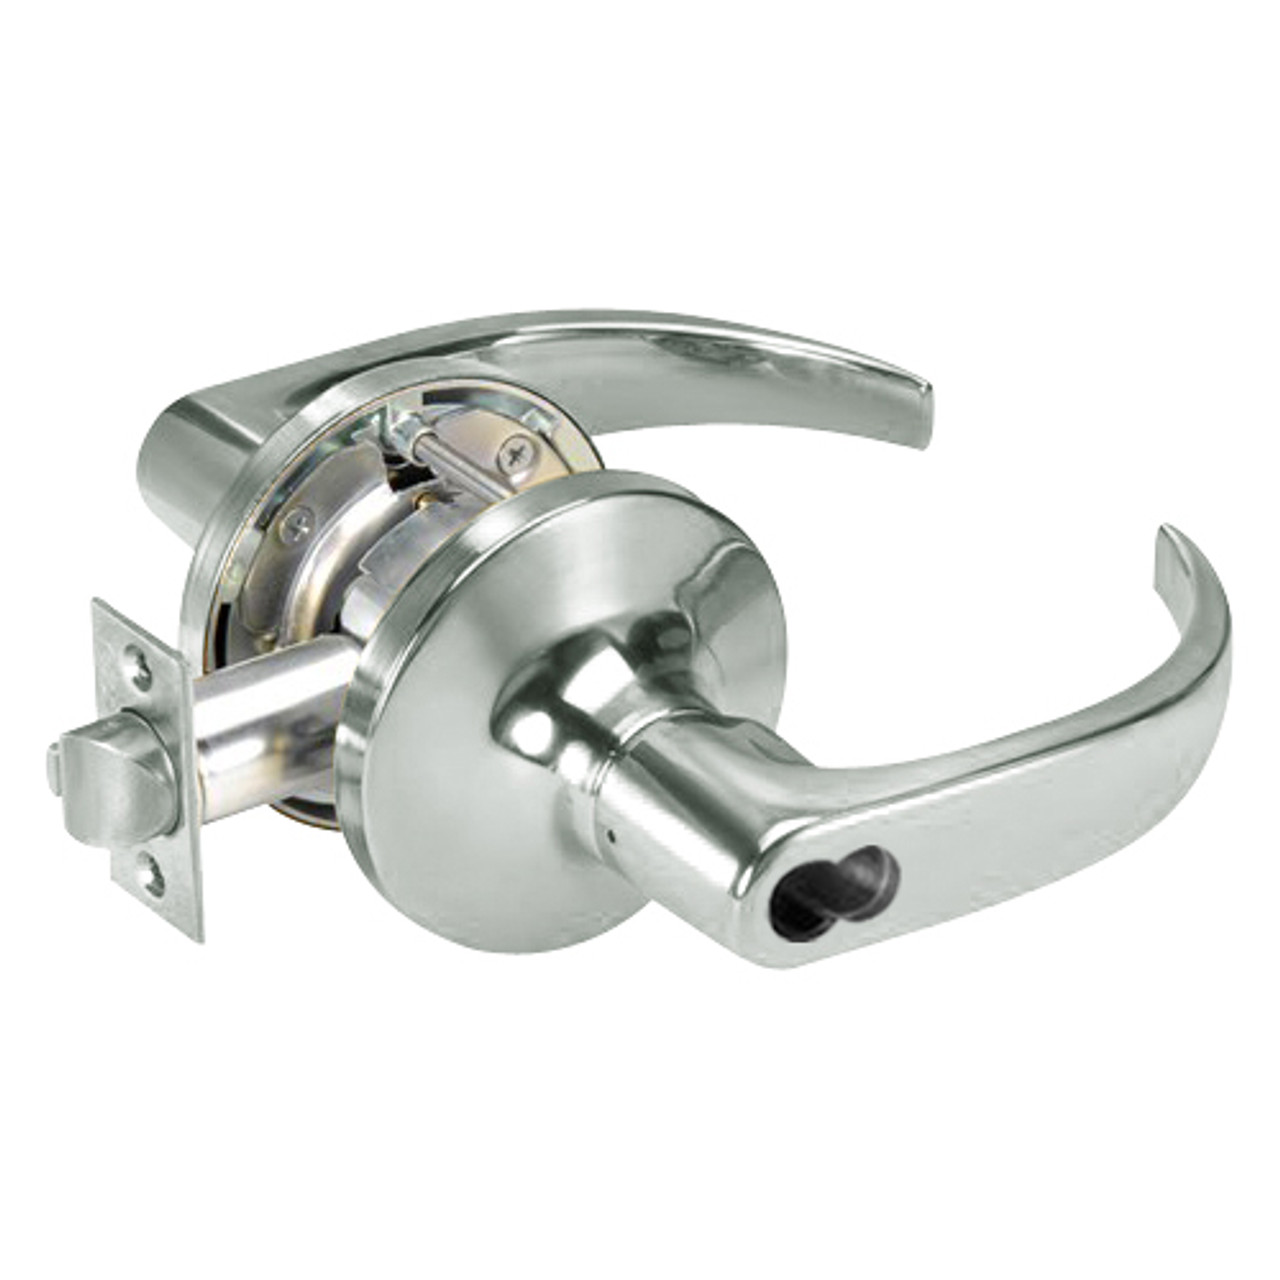 SI-PB5404LN-619 Yale 5400LN Series Single Cylinder Entry Cylindrical Locks with Pacific Beach Lever Prepped for Schlage IC Core in Satin Nickel